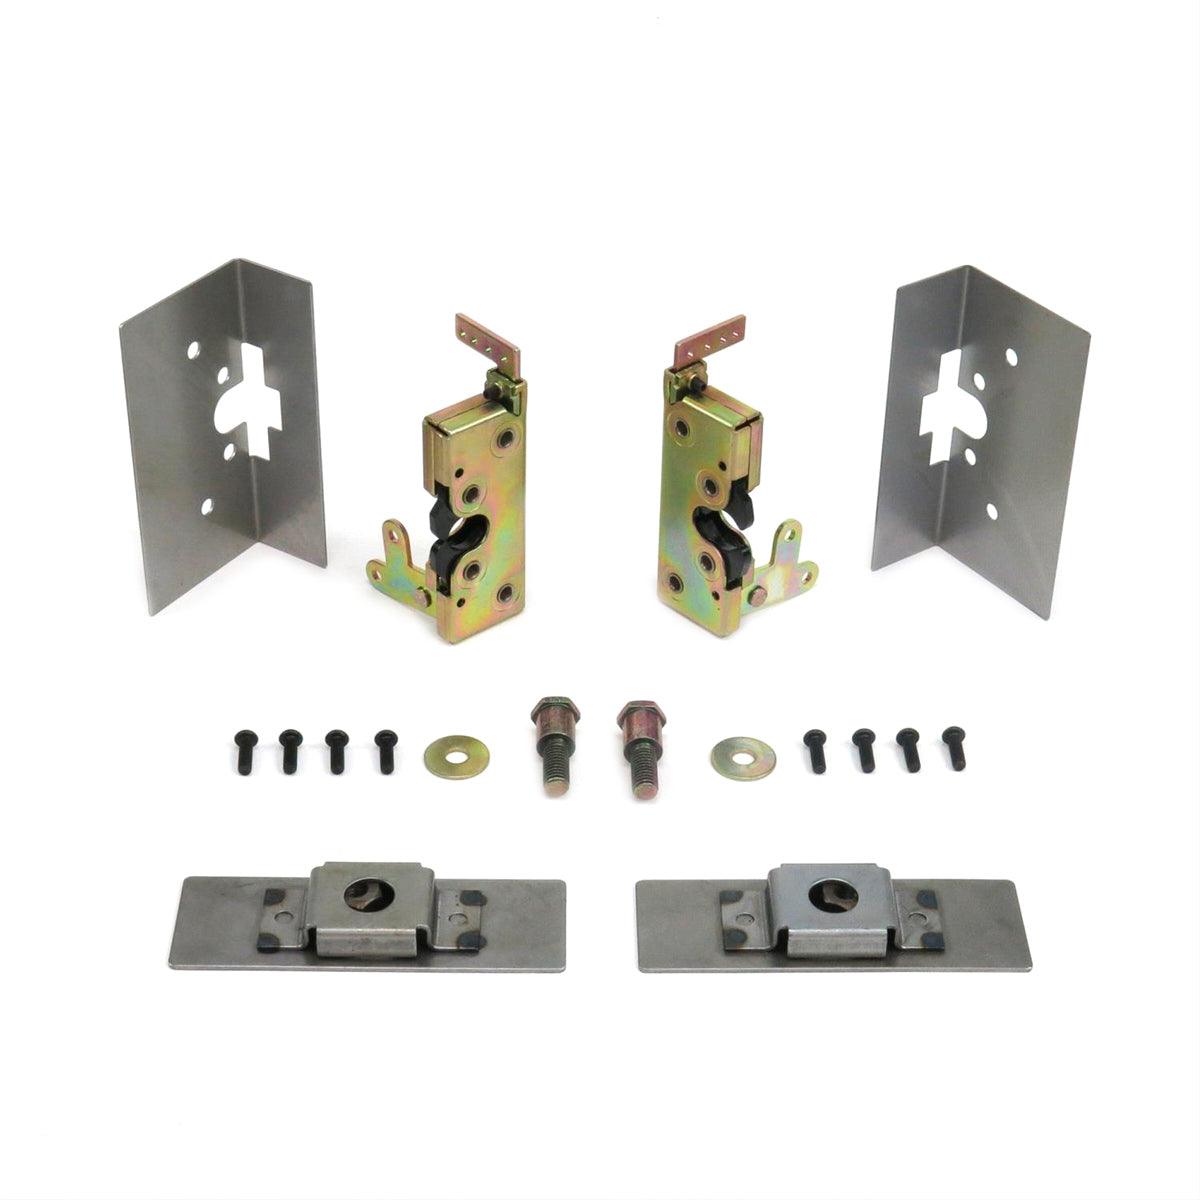 Large Bear Claw Door Latches w/ Install Kit - Burlile Performance Products